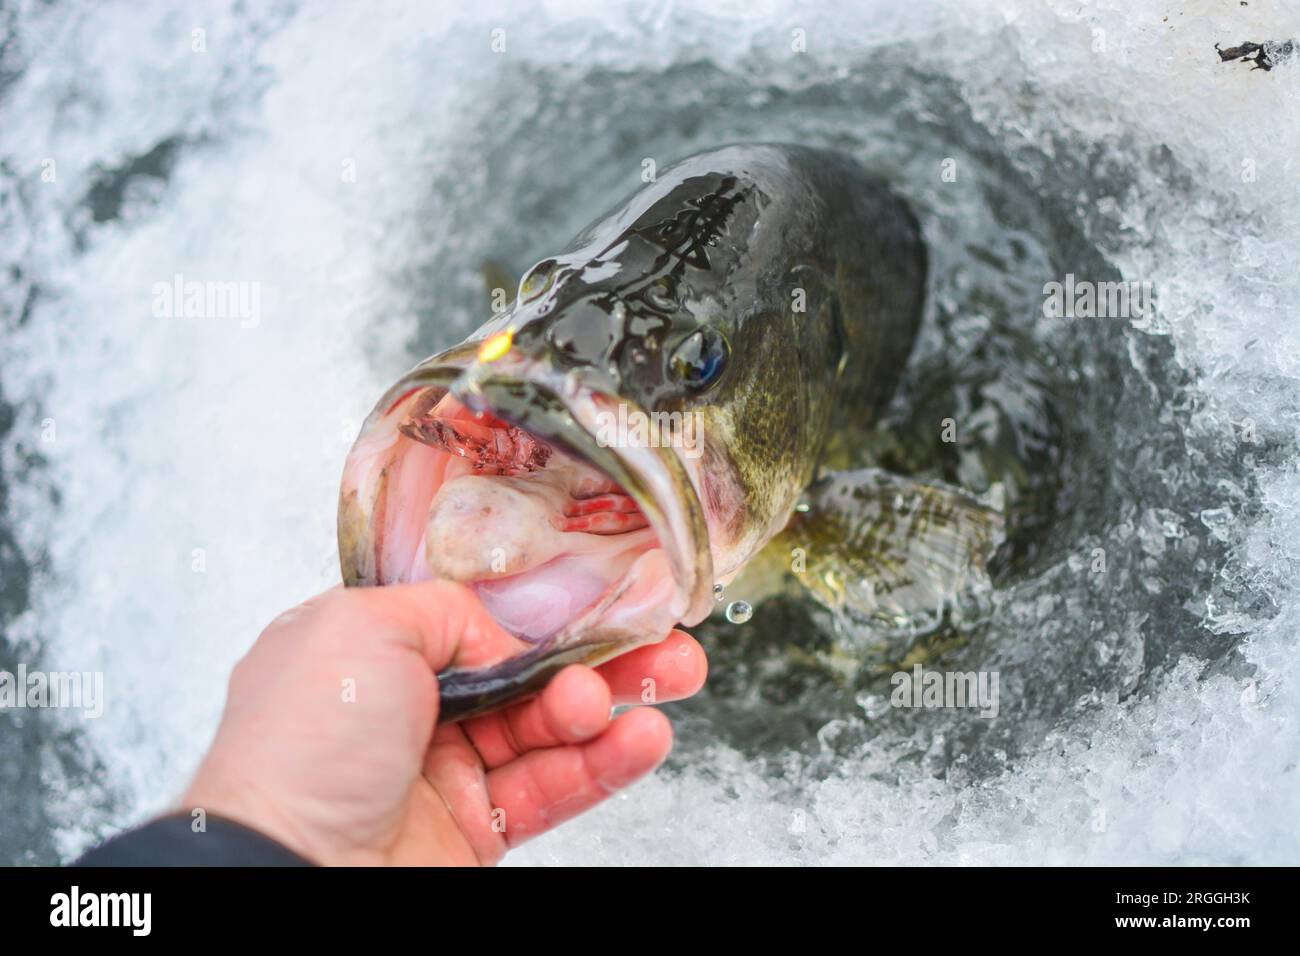 Largemouth bass caught on ice fishing trip, winter activities natural background, catching fish Stock Photo